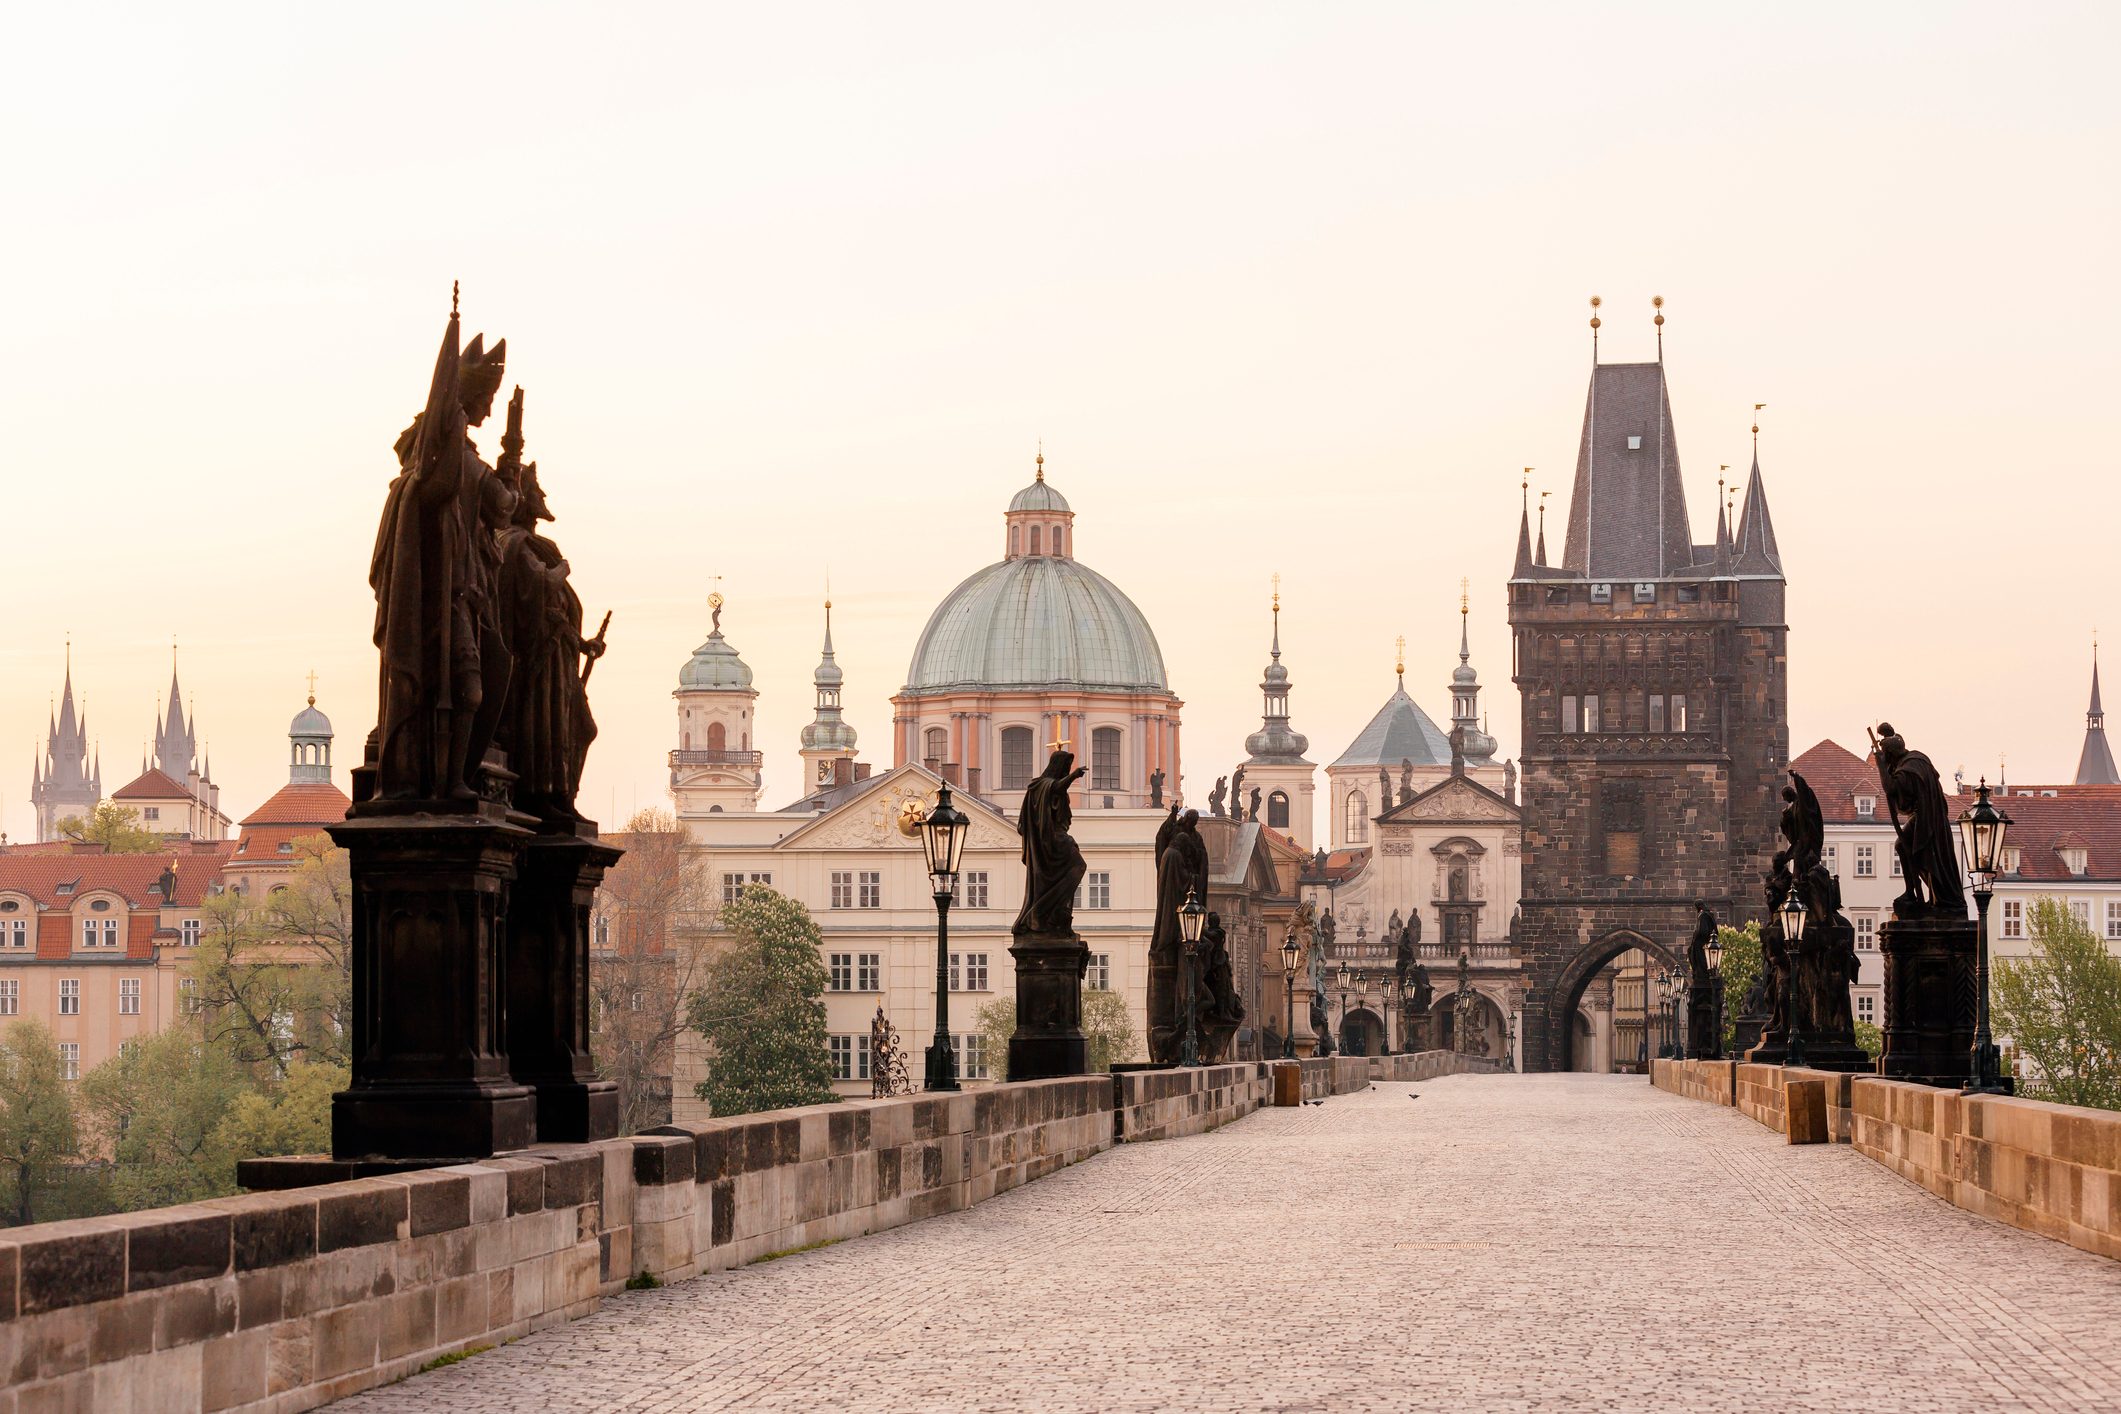 <p class=""><strong>Best for: </strong>Walking</p> <p>Prague isn't just one of the top trips for seniors; it's also one of our favorite <a href="https://www.rd.com/list/secret-location-every-state/" rel="noopener noreferrer">hidden gems</a> in Europe. The perfectly preserved city has bright red trolleys traversing original cobblestone streets hemmed in by charming stone buildings. Around every corner, you'll find a new treat, like the Charles Bridge, which is lined with majestic stone statues, Michelin-starred restaurants and classic pilsner bars. Another highlight: an entire "castle district" centered around majestic Prague Castle. It ranks high on the survey for its walkability and public transportation, making it an easy city to explore without worrying about needing a ride.</p> <p class="listicle-page__cta-button-shop"><a class="shop-btn" href="https://www.tripadvisor.com/AttractionProductReview-g274707-d11882926-Prague_3_hour_Afternoon_Walking_Tour_including_Prague_Castle-Prague_Bohemia.html">Book a Tour</a></p>